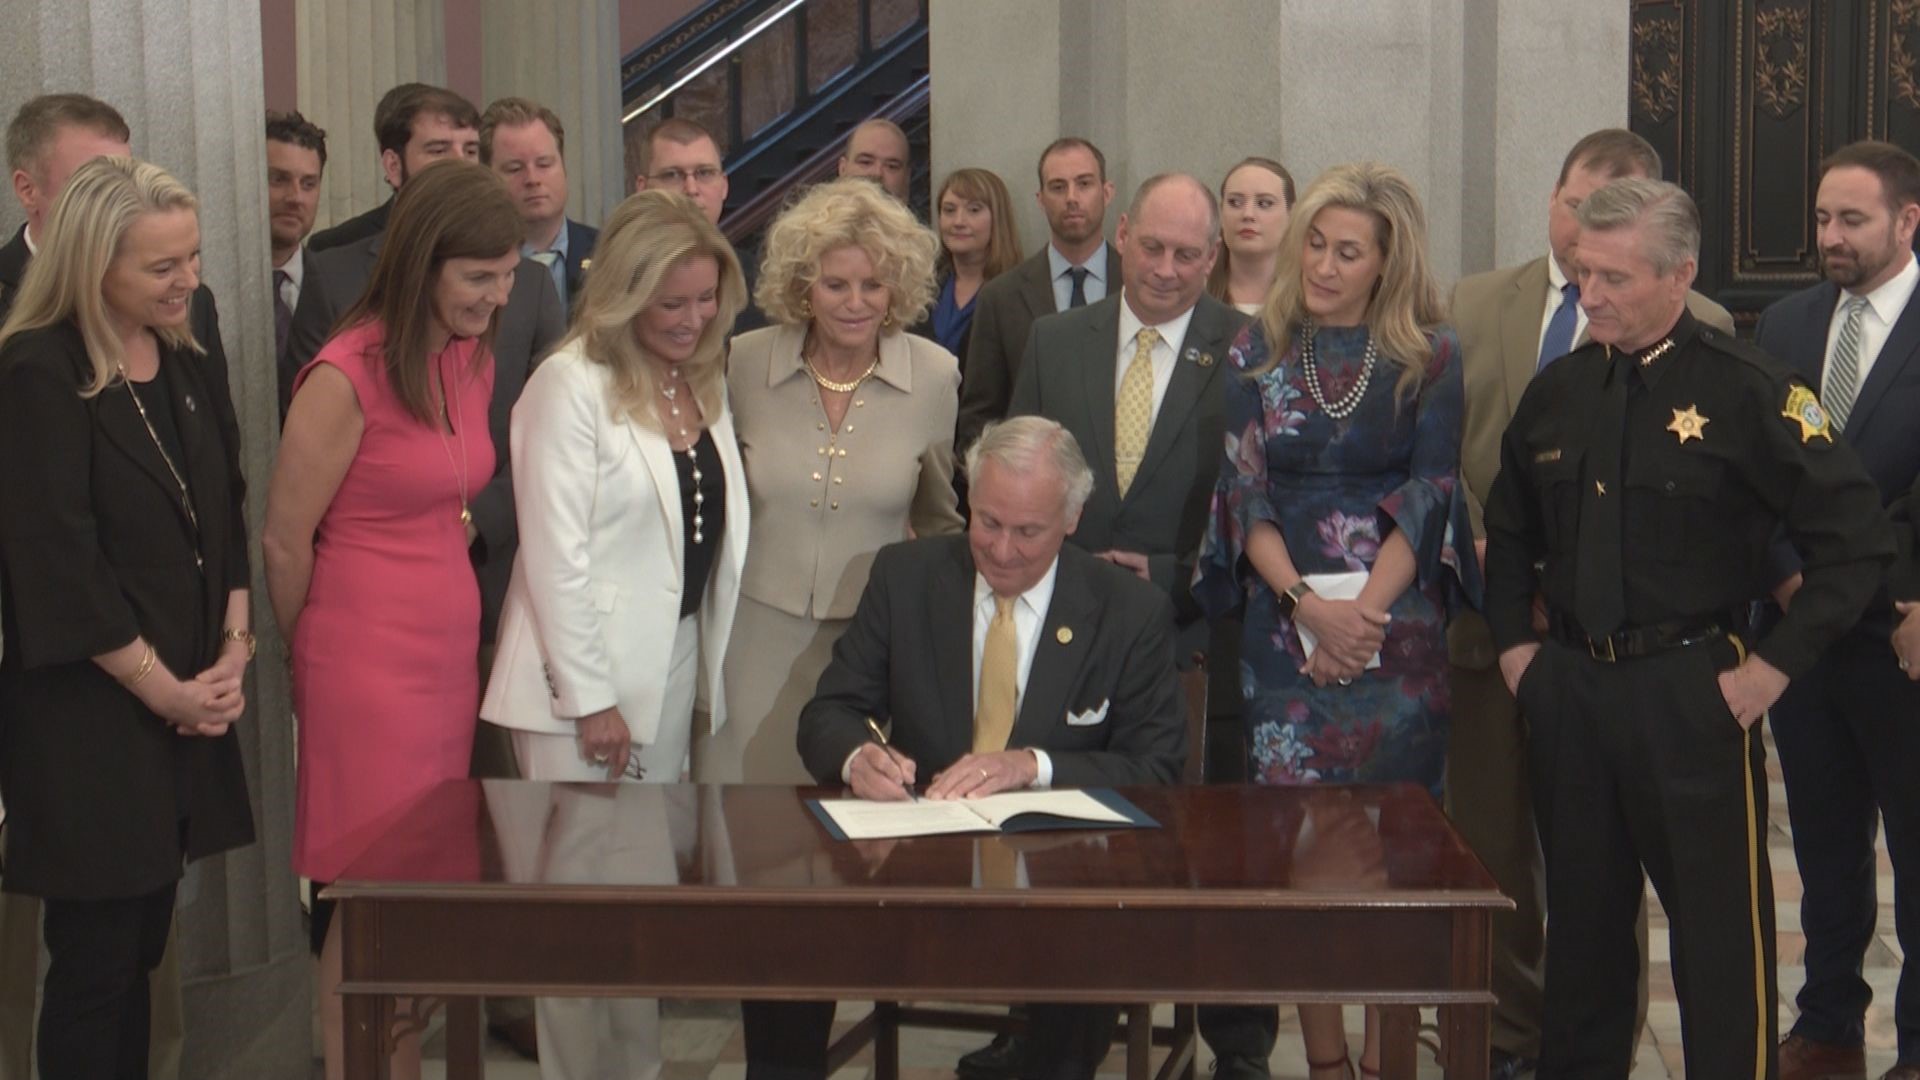 South Carolina made history today as Governor Henry McMaster signed the first governor's pledge aimed at internet safety among children.